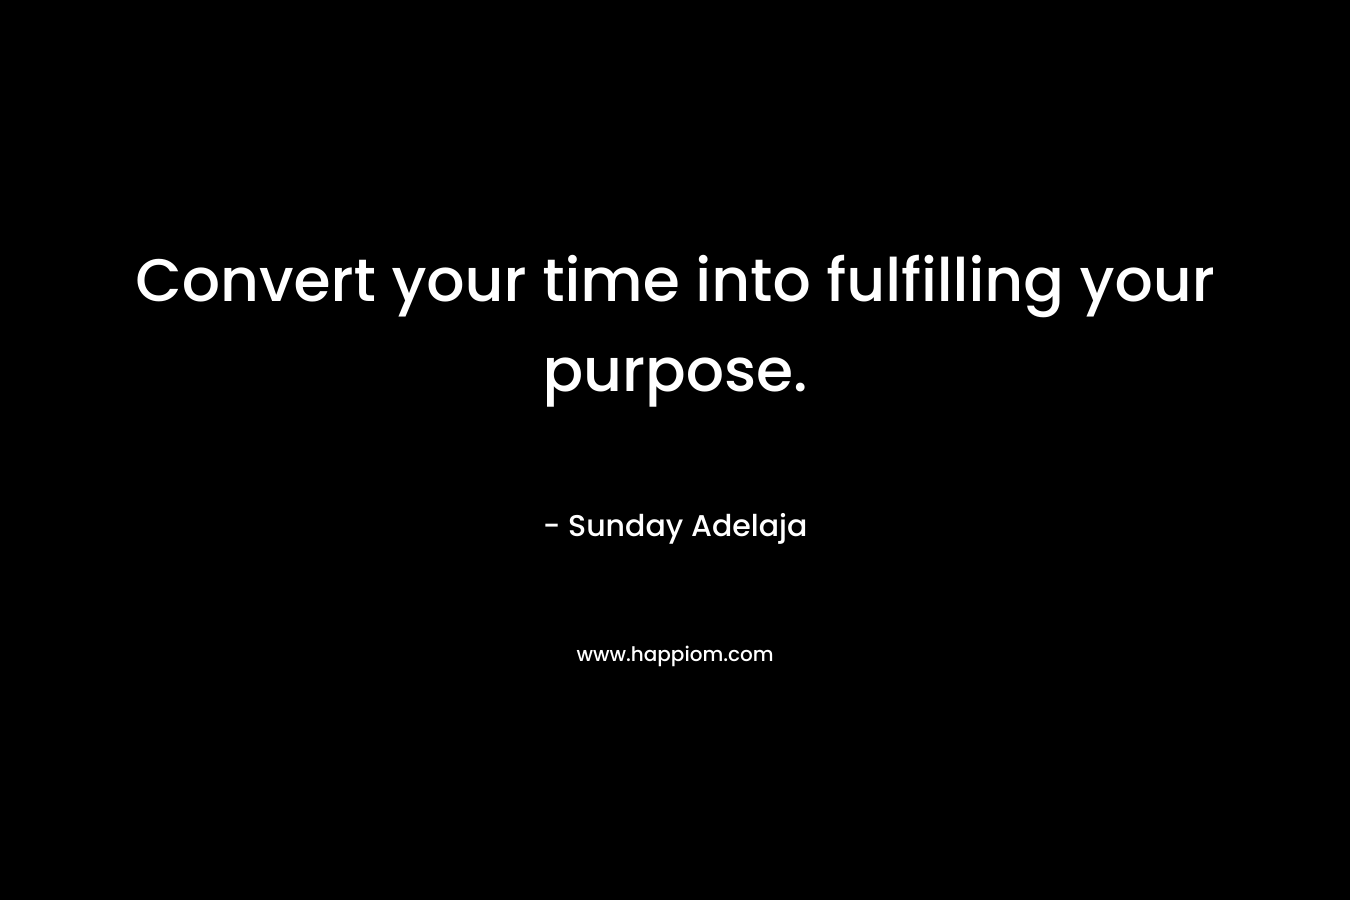 Convert your time into fulfilling your purpose.